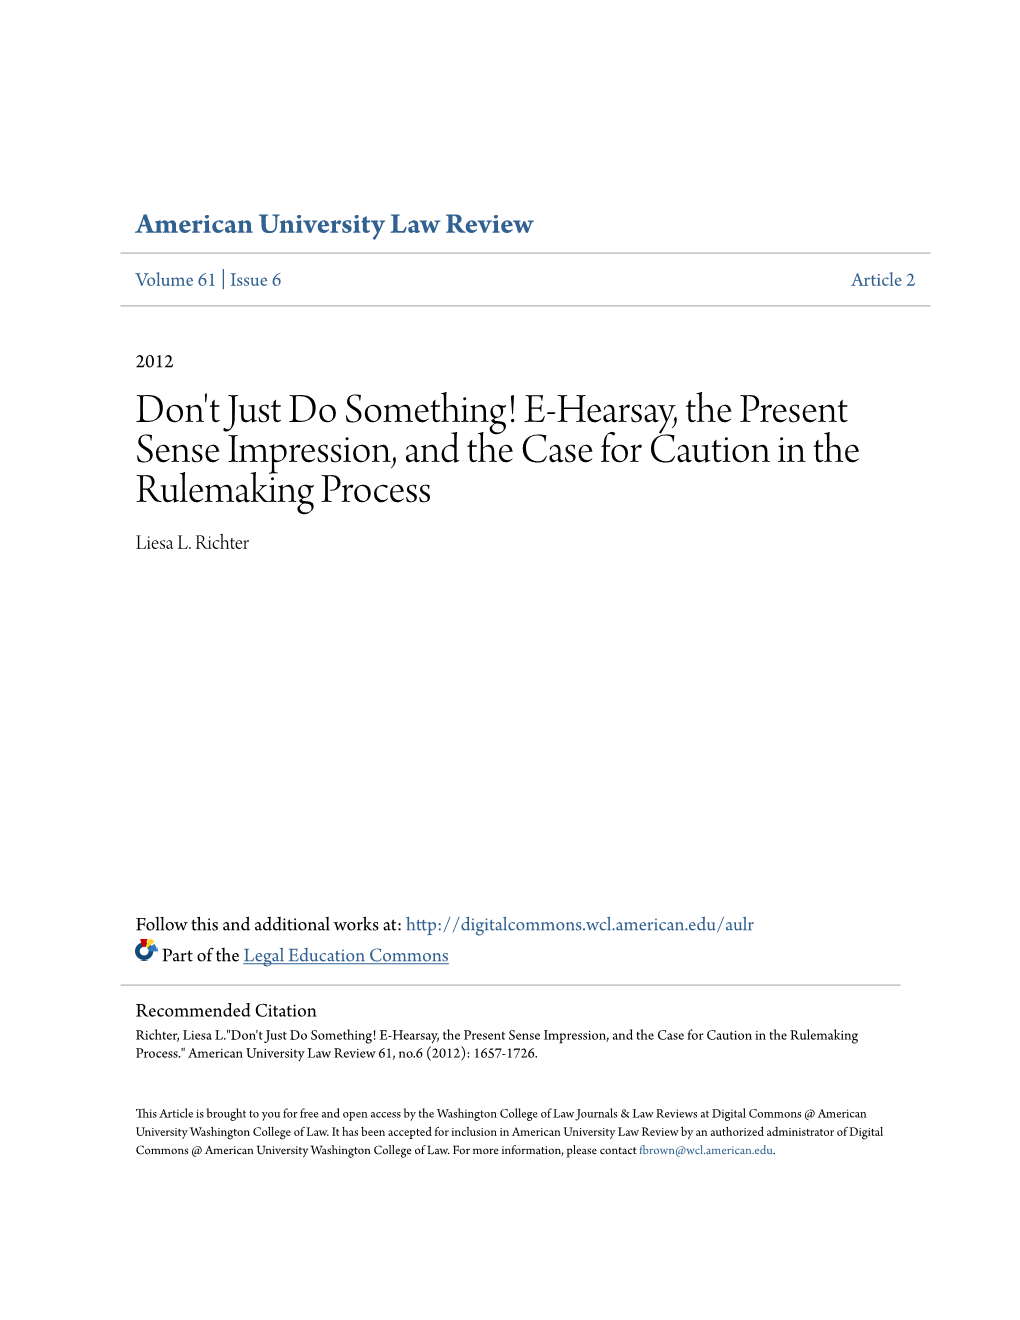 E-Hearsay, the Present Sense Impression, and the Case for Caution in the Rulemaking Process Liesa L